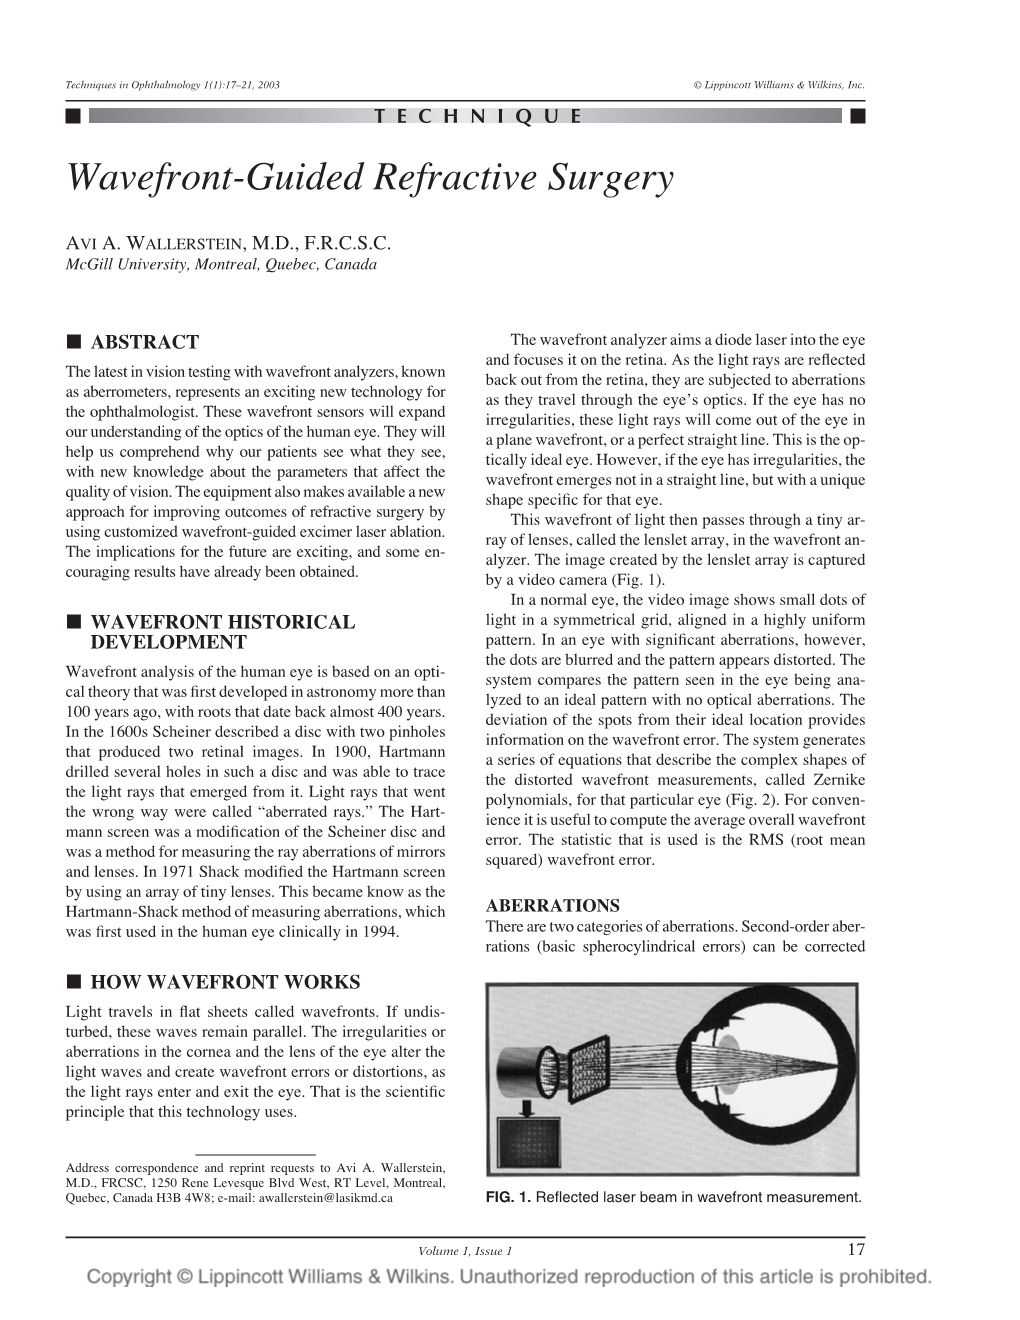 Wavefront-Guided Refractive Surgery